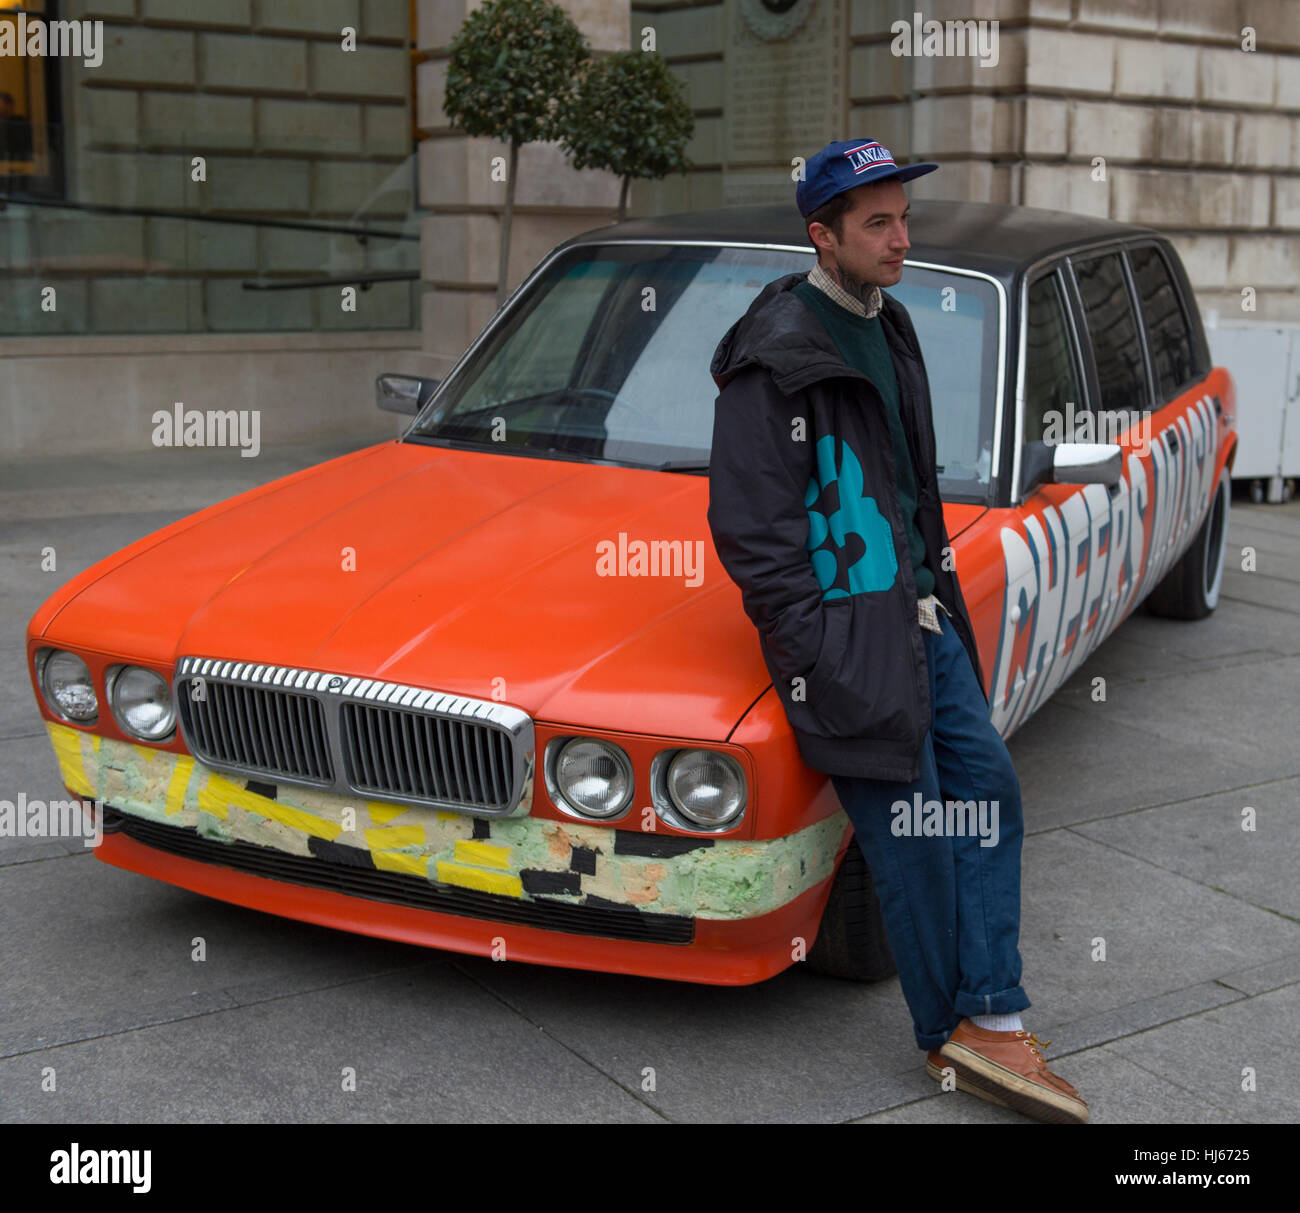 Royal Academy, London, UK. 26th January, 2017. Premiums Interim Projects presents an opportunity to view new work by 13 second year students at the interim point of their postgraduate study at the RA Schools, the UK’s longest established art school. Thomas Langley, artist, with Chavy boy - a Daimler xj6 limousine, polyurethane, glass, sound. © Malcolm Park editorial/Alamy Live News. Stock Photo